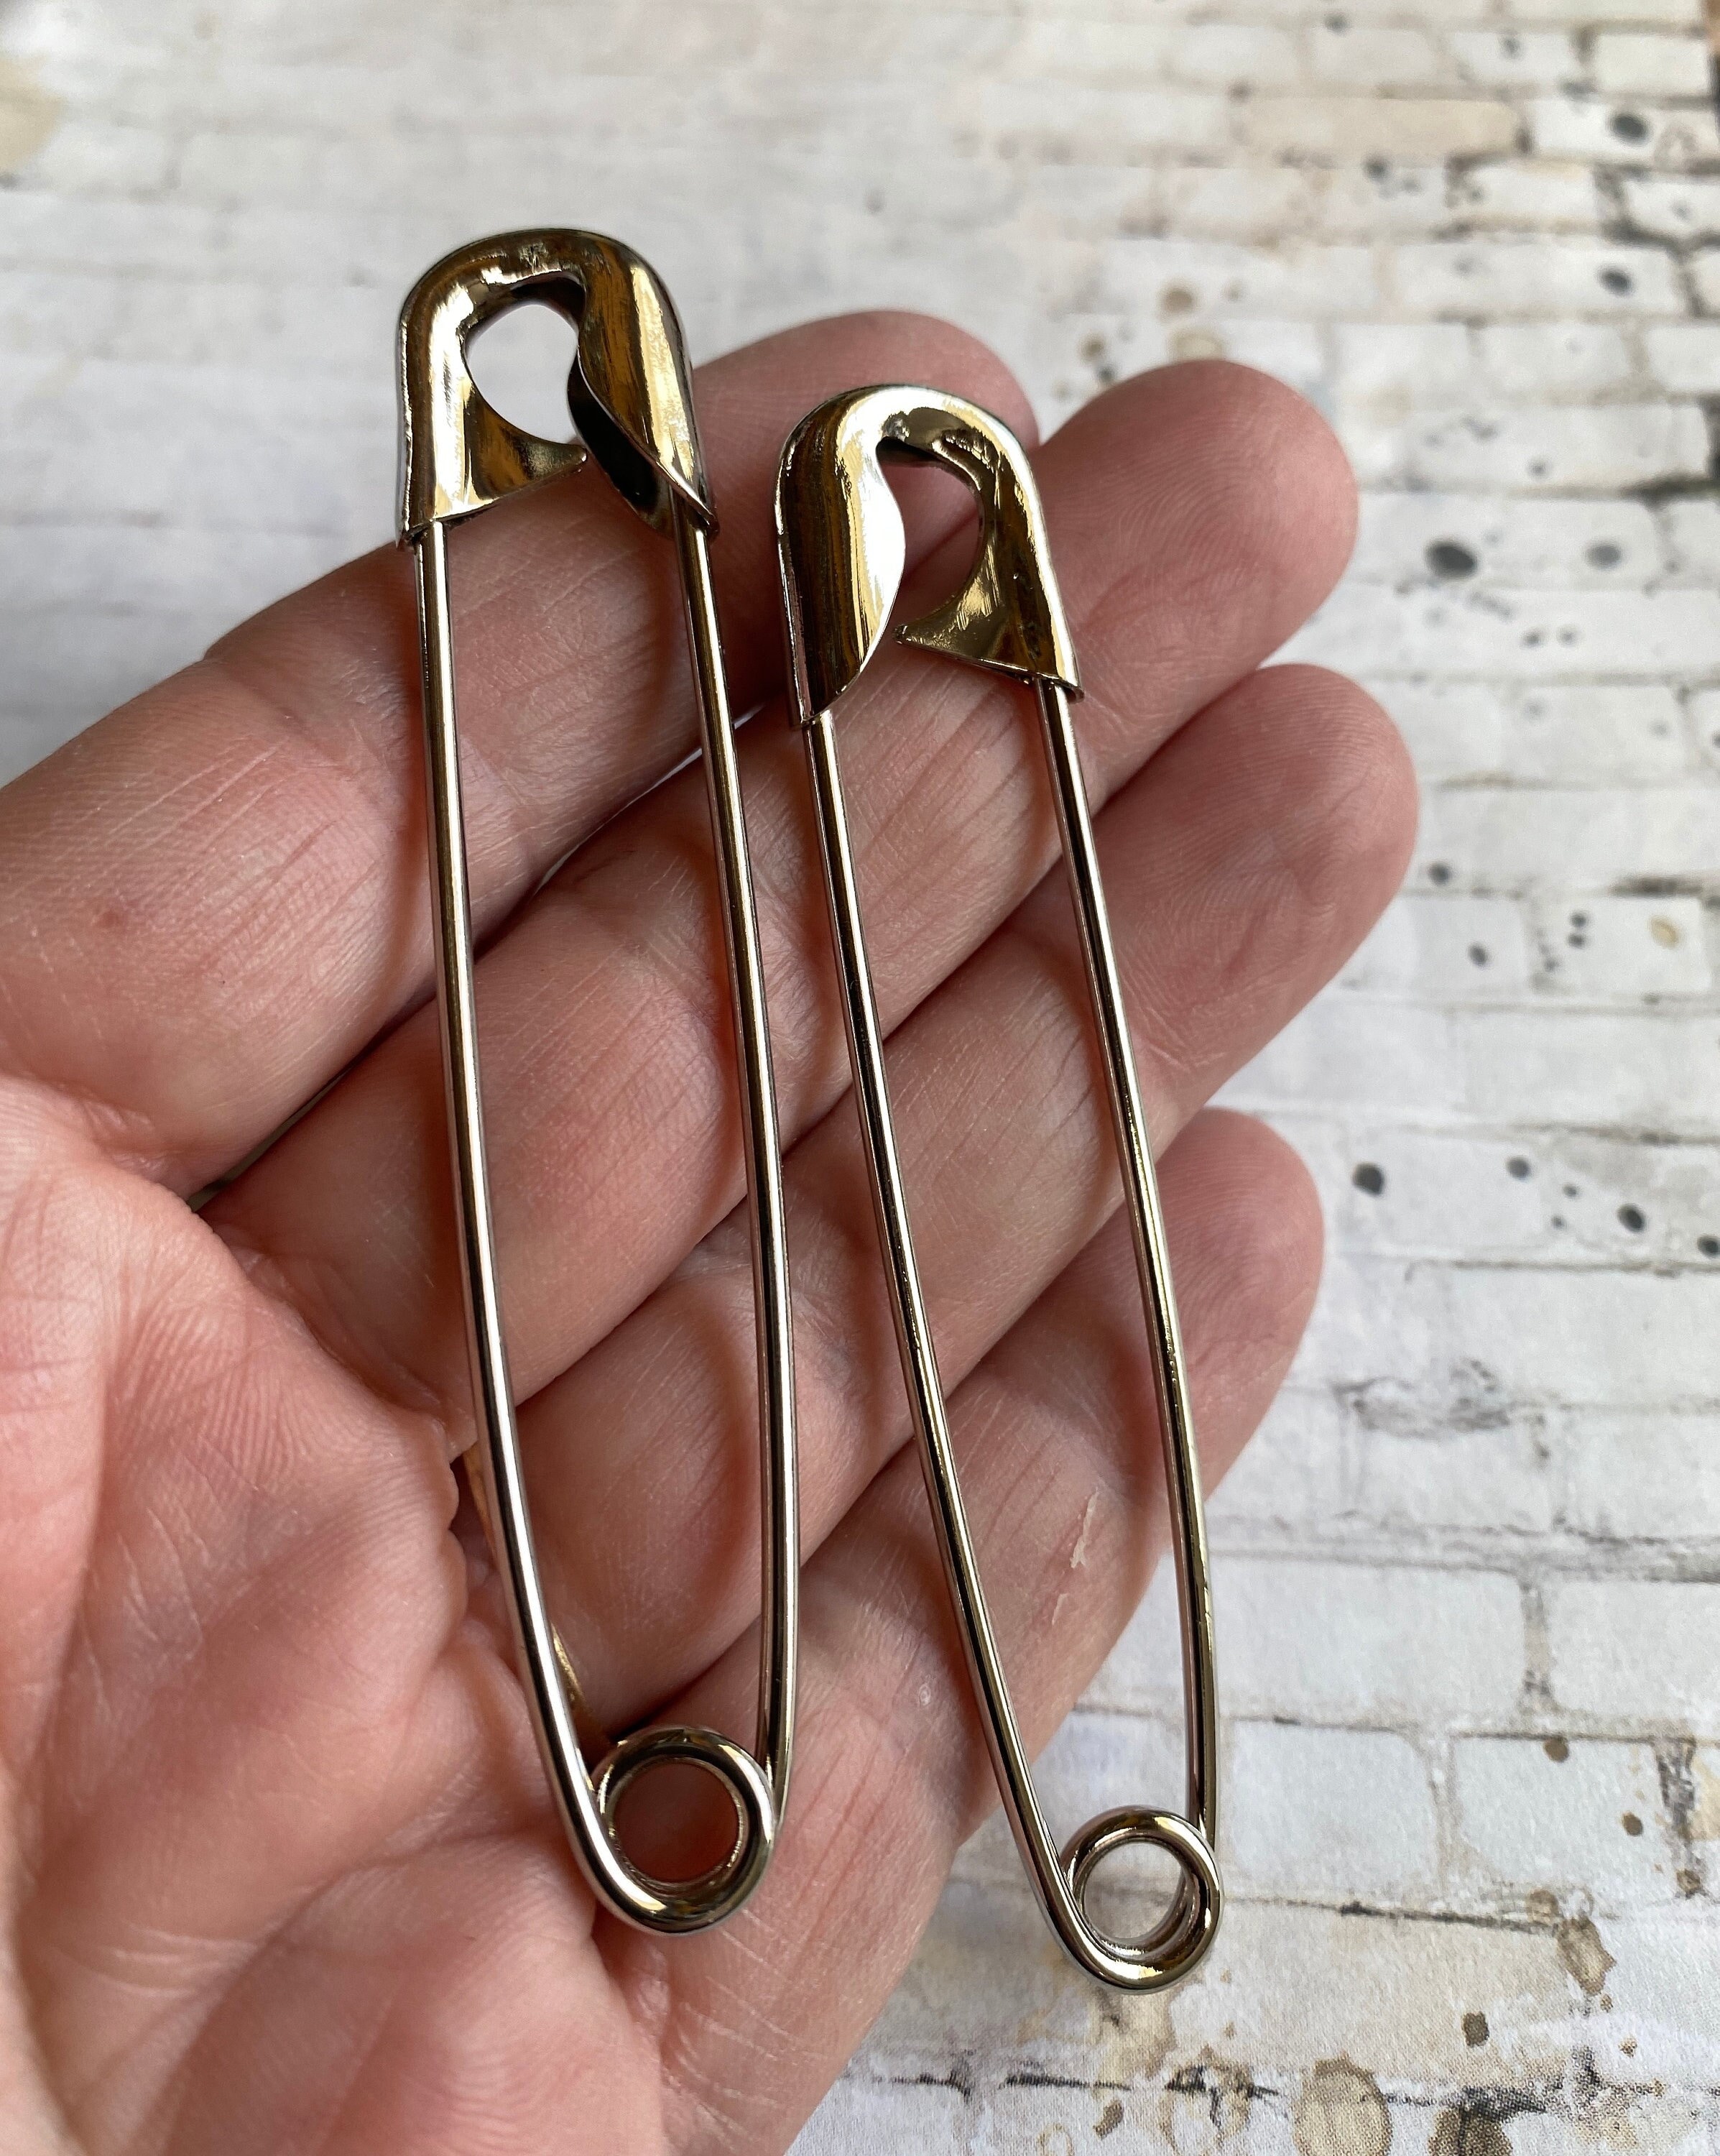 5 PCS Stainless Steel Safety Pins Large, Large Safety Pins, 5 inch Safety  Pins, Silver Huge Strong XL Safety Pins, Extra Large - AliExpress